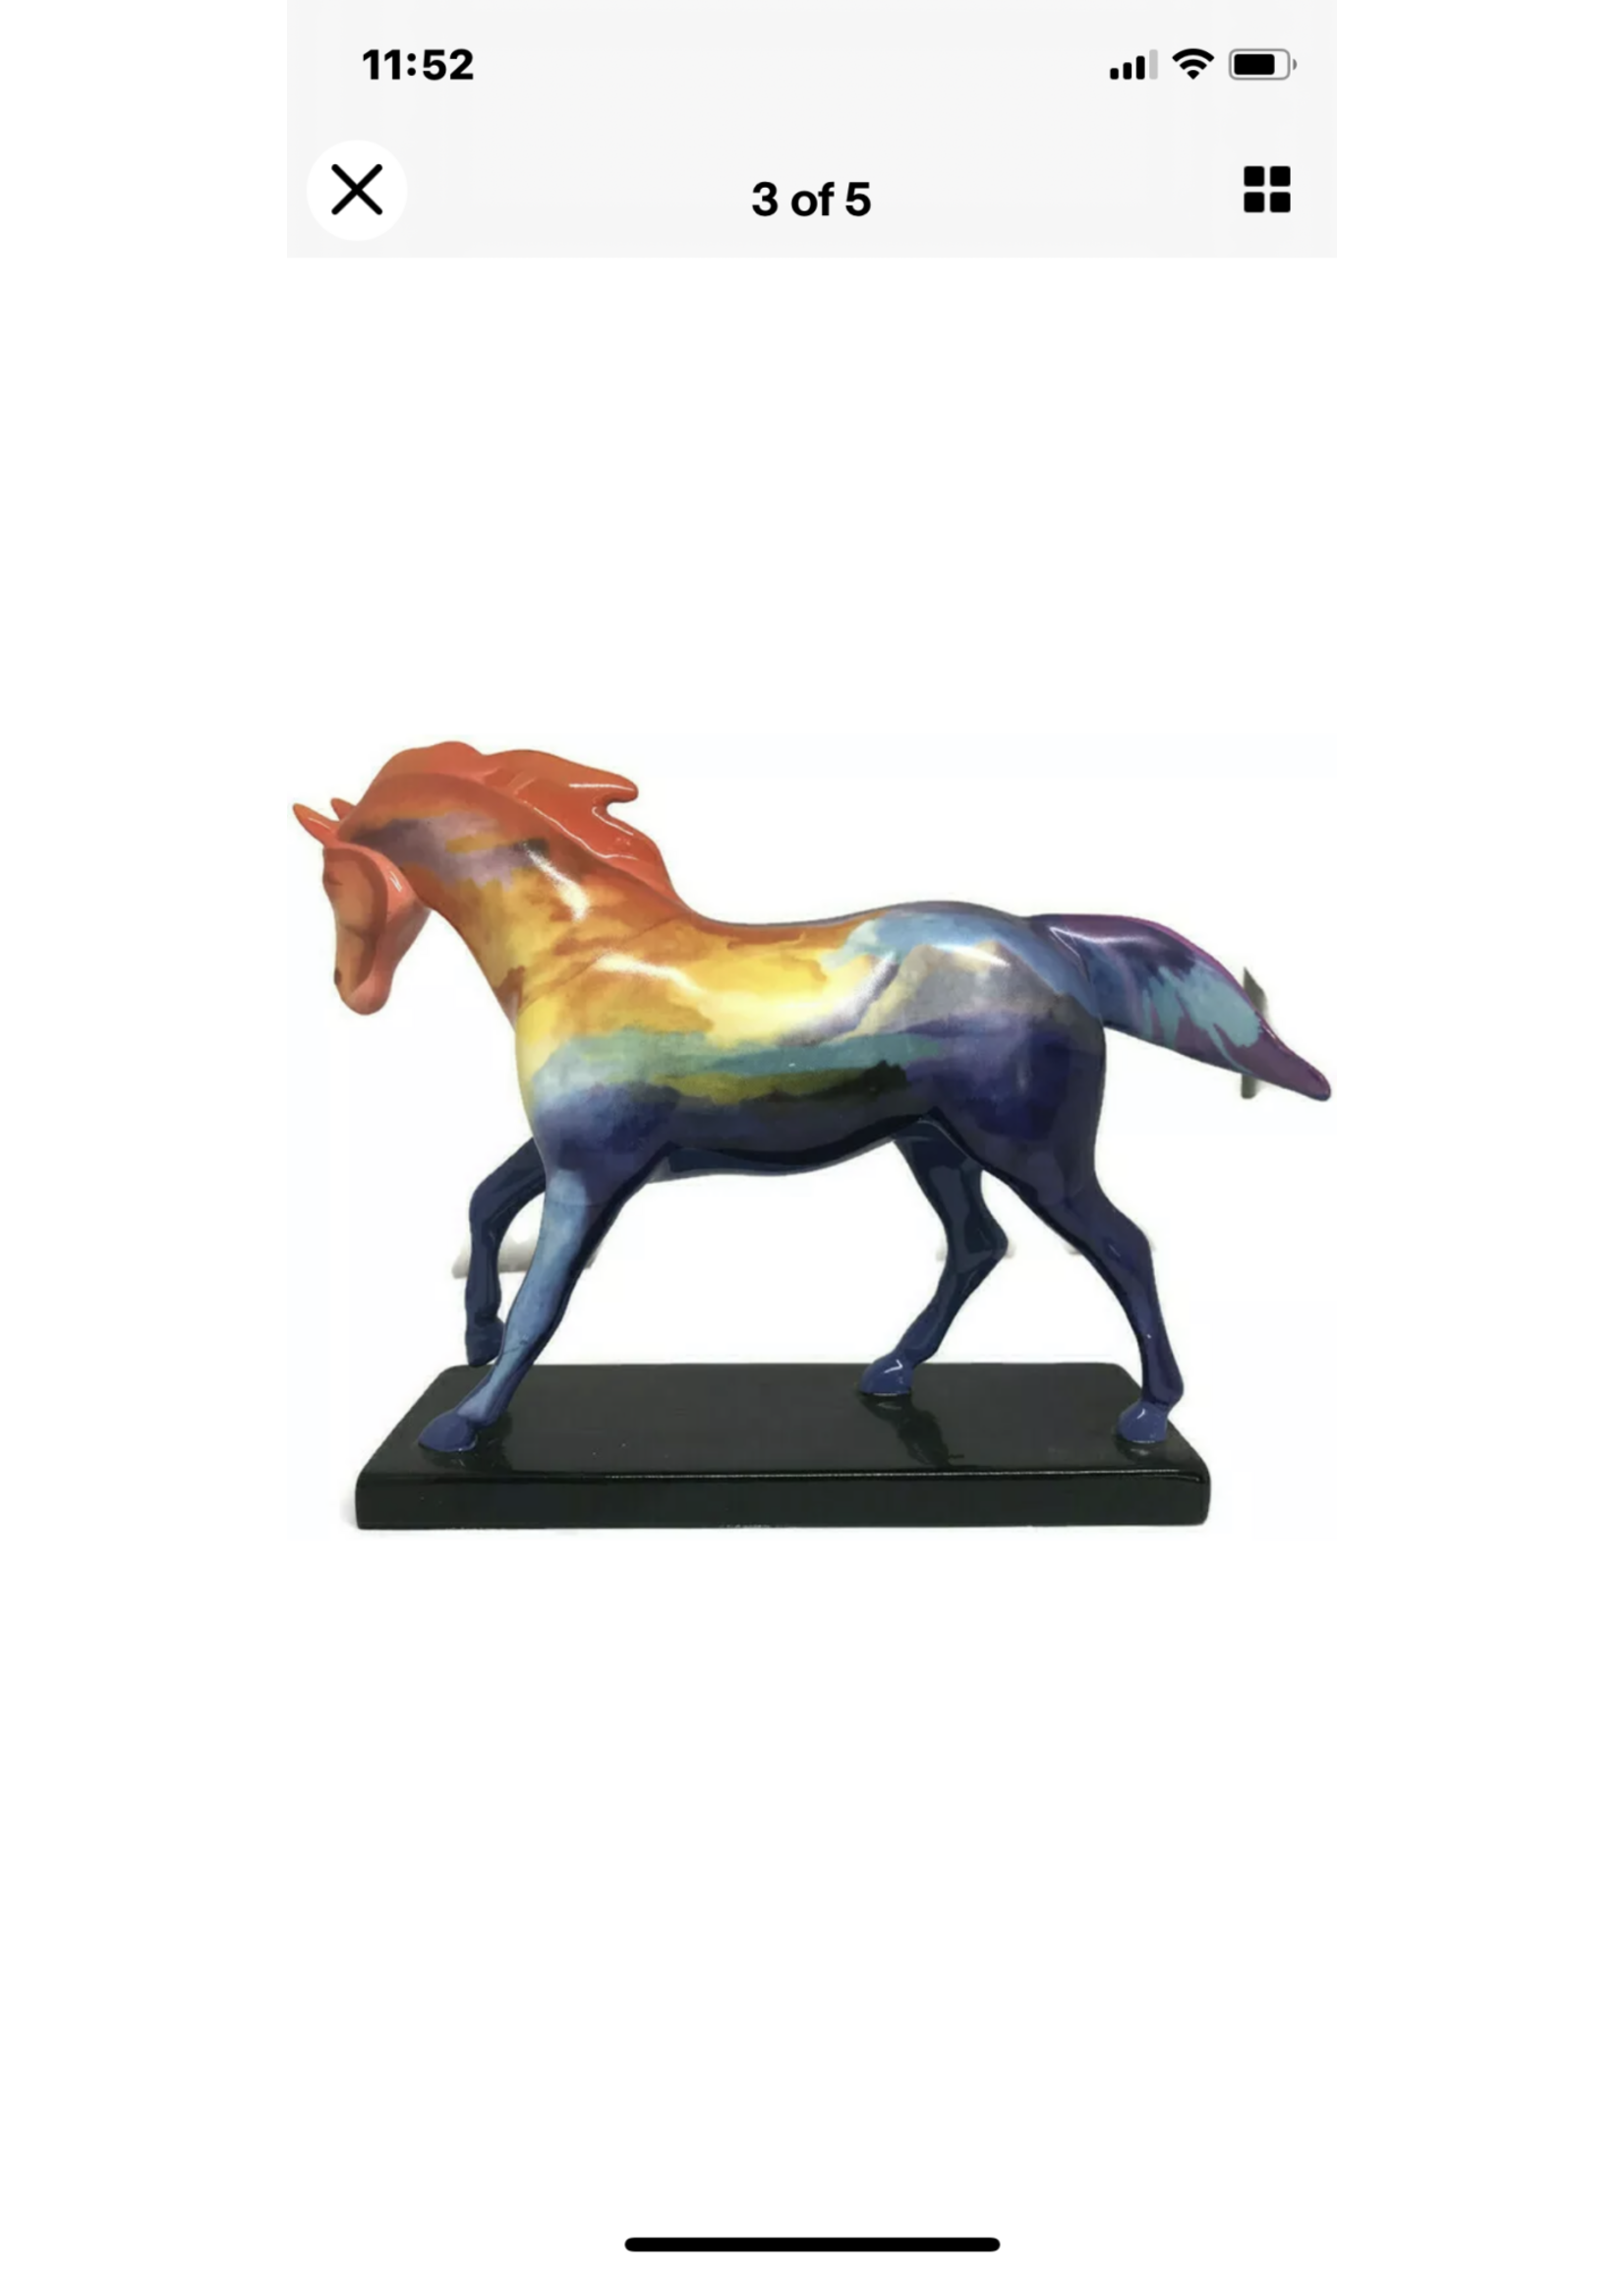 Trail of Painted Ponies TOPP 2003 Renewal of Life 1467 1E 7278 NB